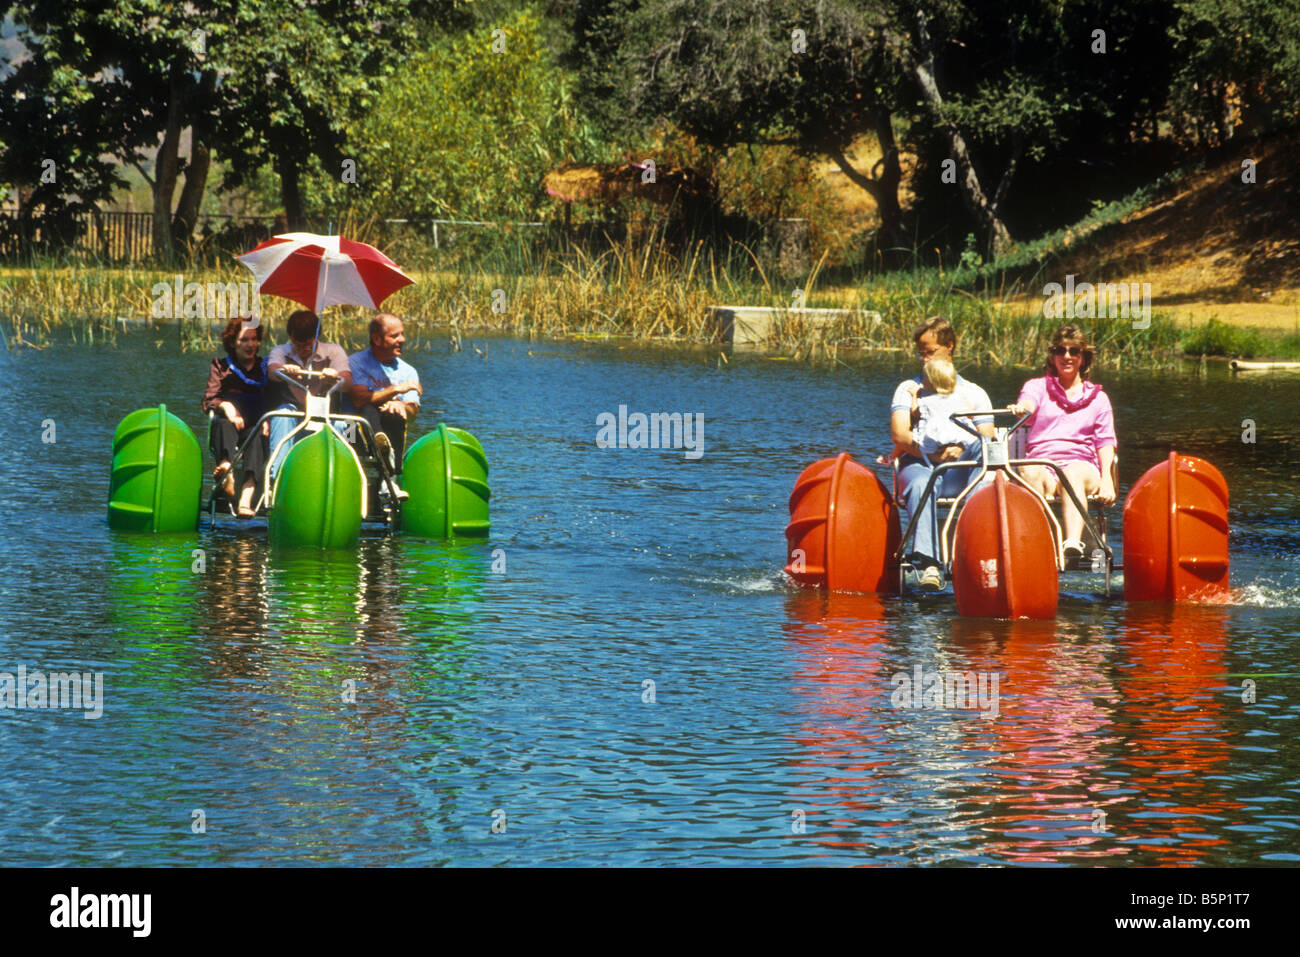 People race each other in paddle wheel boats in park lake. Stock Photo